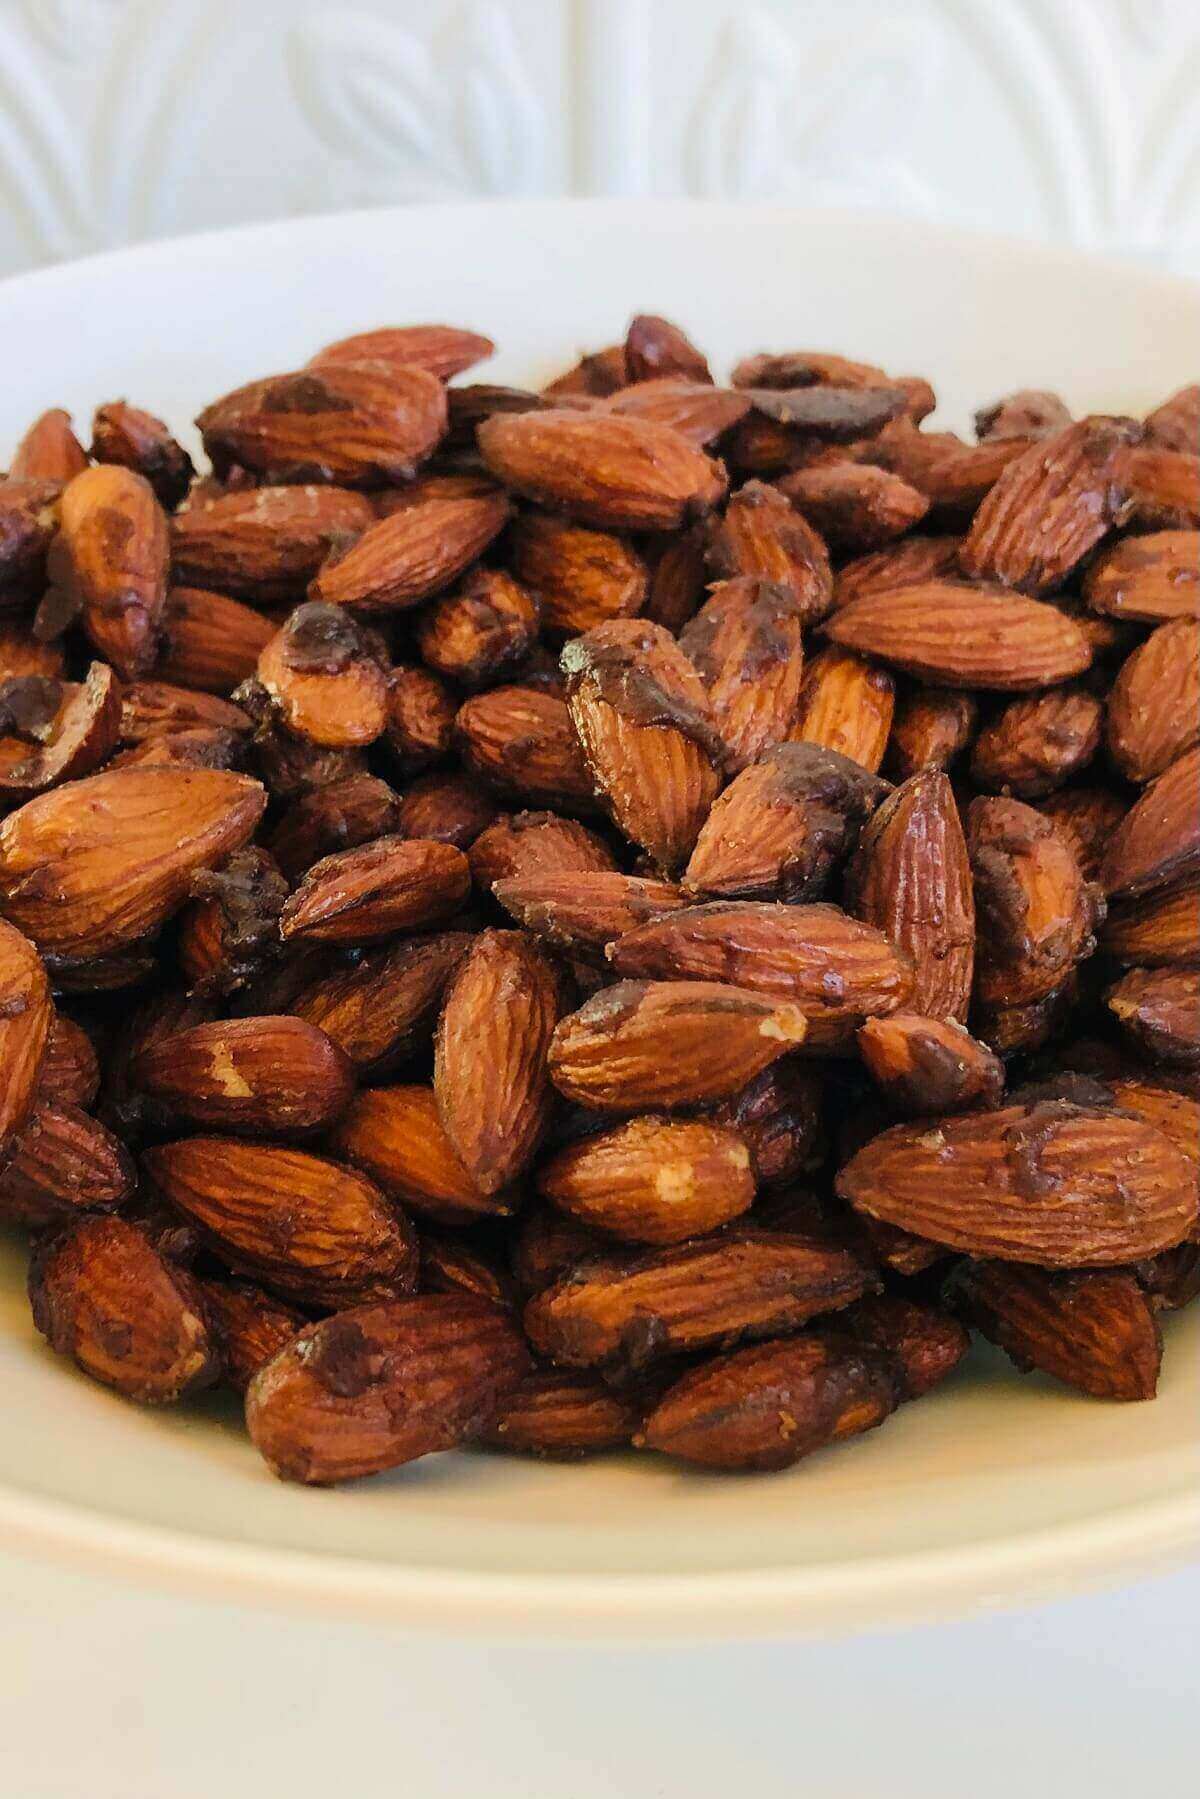 Roasted almonds in a white bowl.